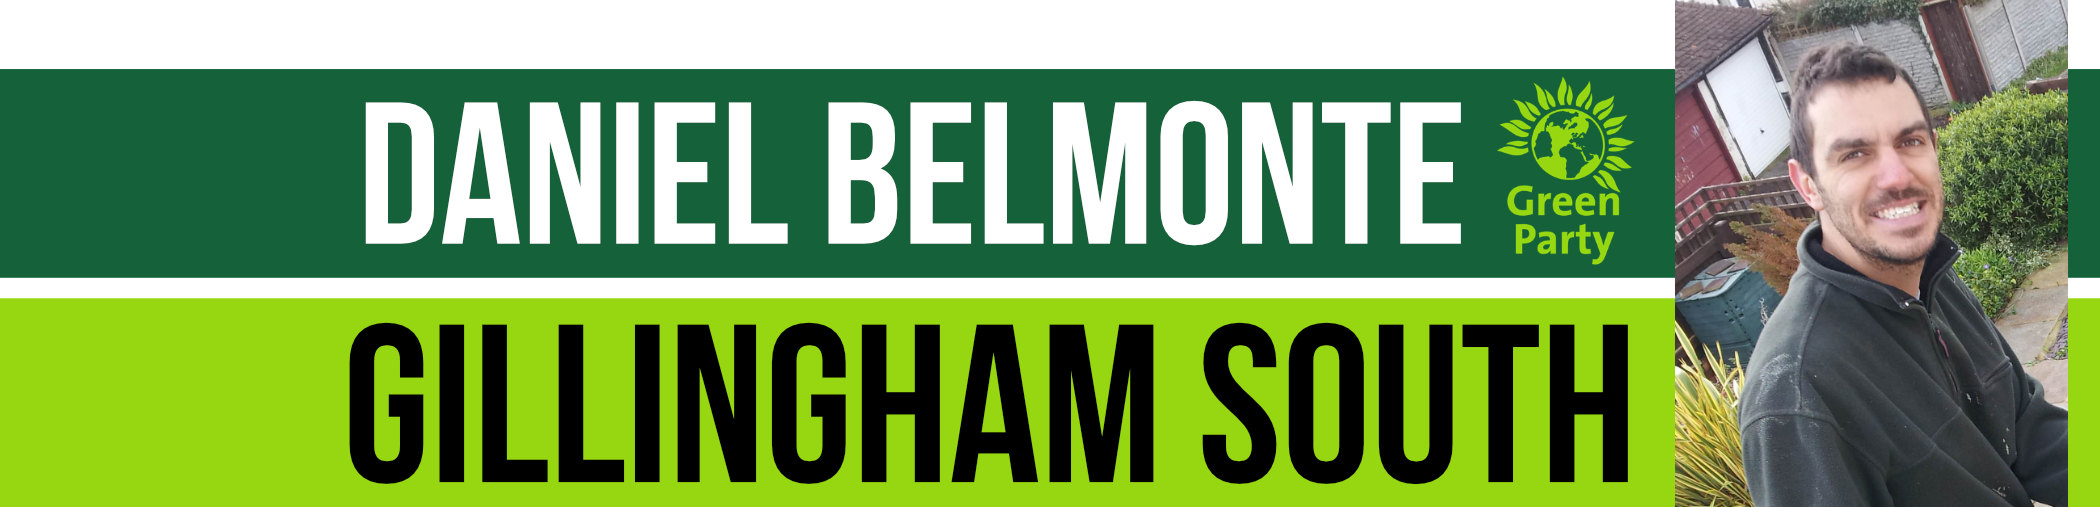 Daniel Belmonte is our Green Party candidate for Gillingham South in Medway Kent